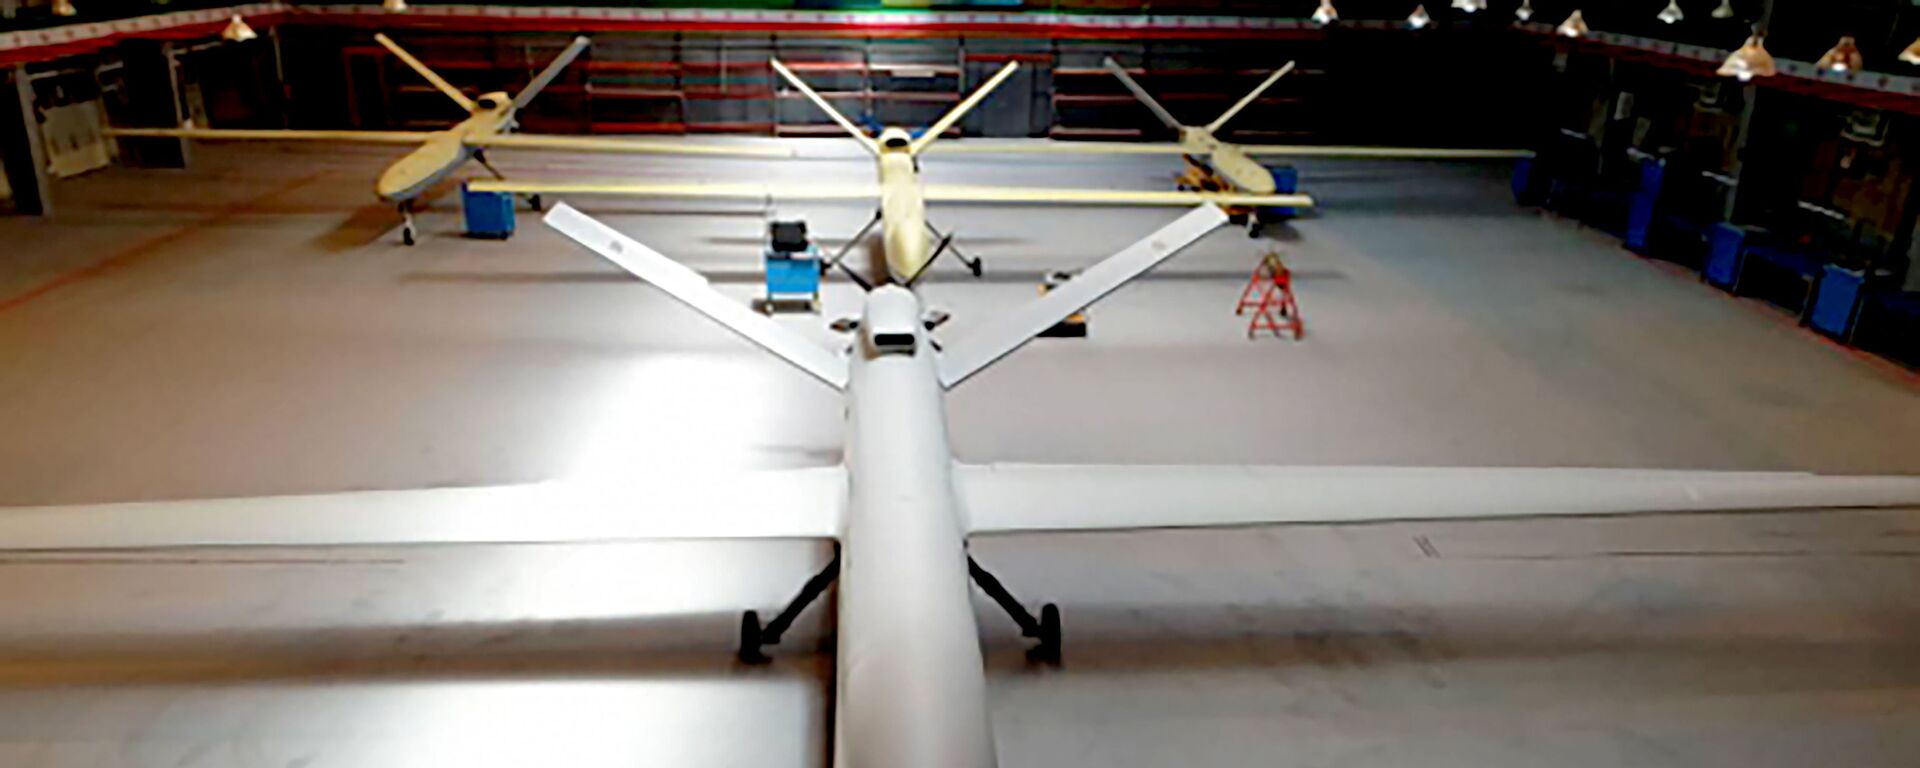 In this photo released on Saturday, May 21, 2021, by Sepahnews, the website of the Iranian Revolutionary Guard, a new Gaza drone is displayed in an undisclosed location in Iran. (Sepahnews via AP) - Sputnik International, 1920, 12.09.2021